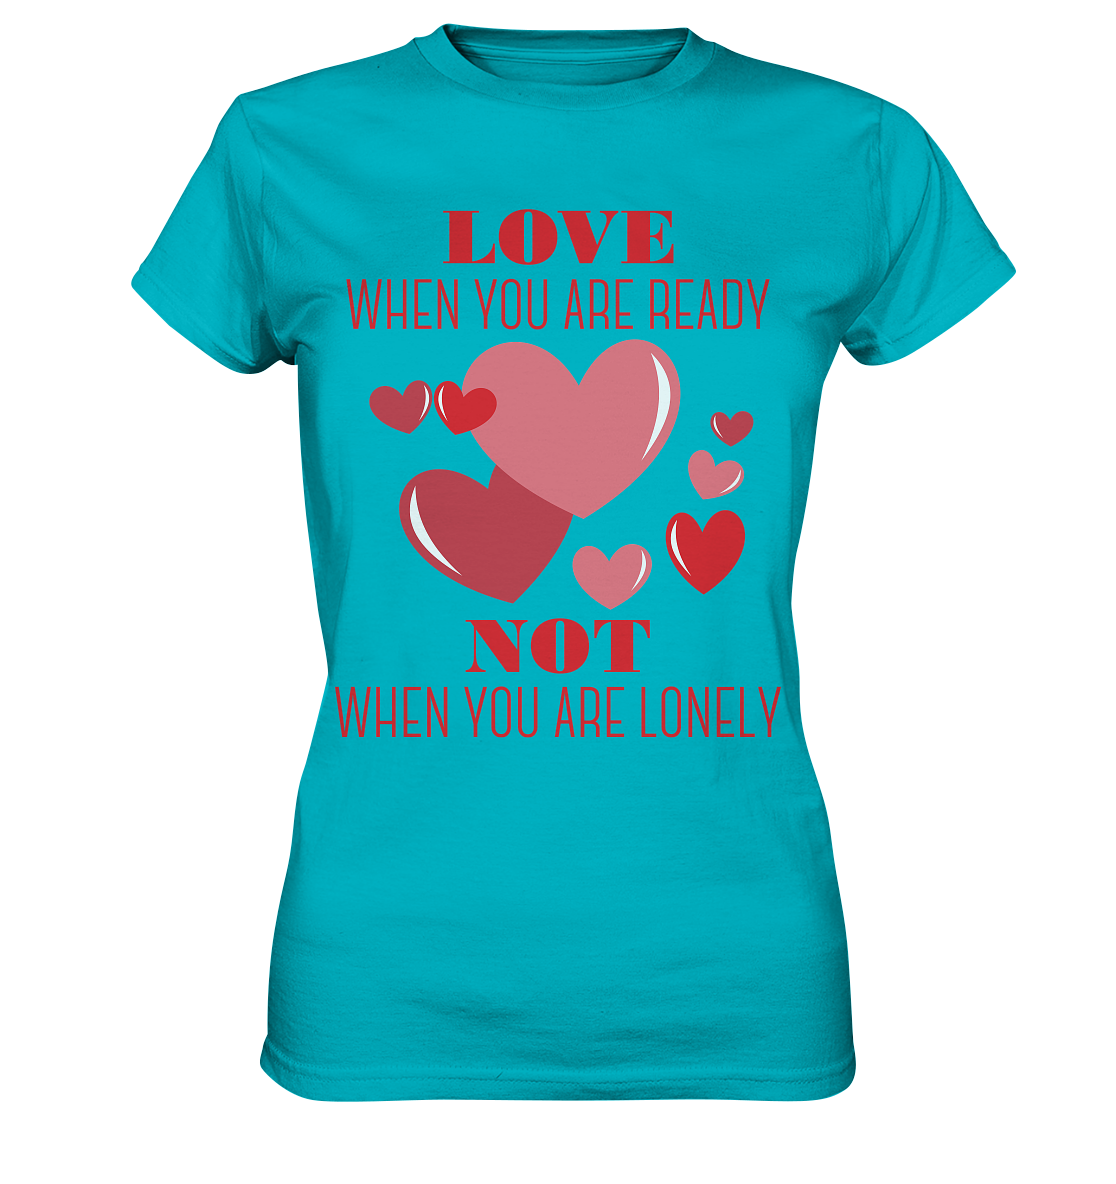 Love when you are ready .. - Ladies Premium Shirt